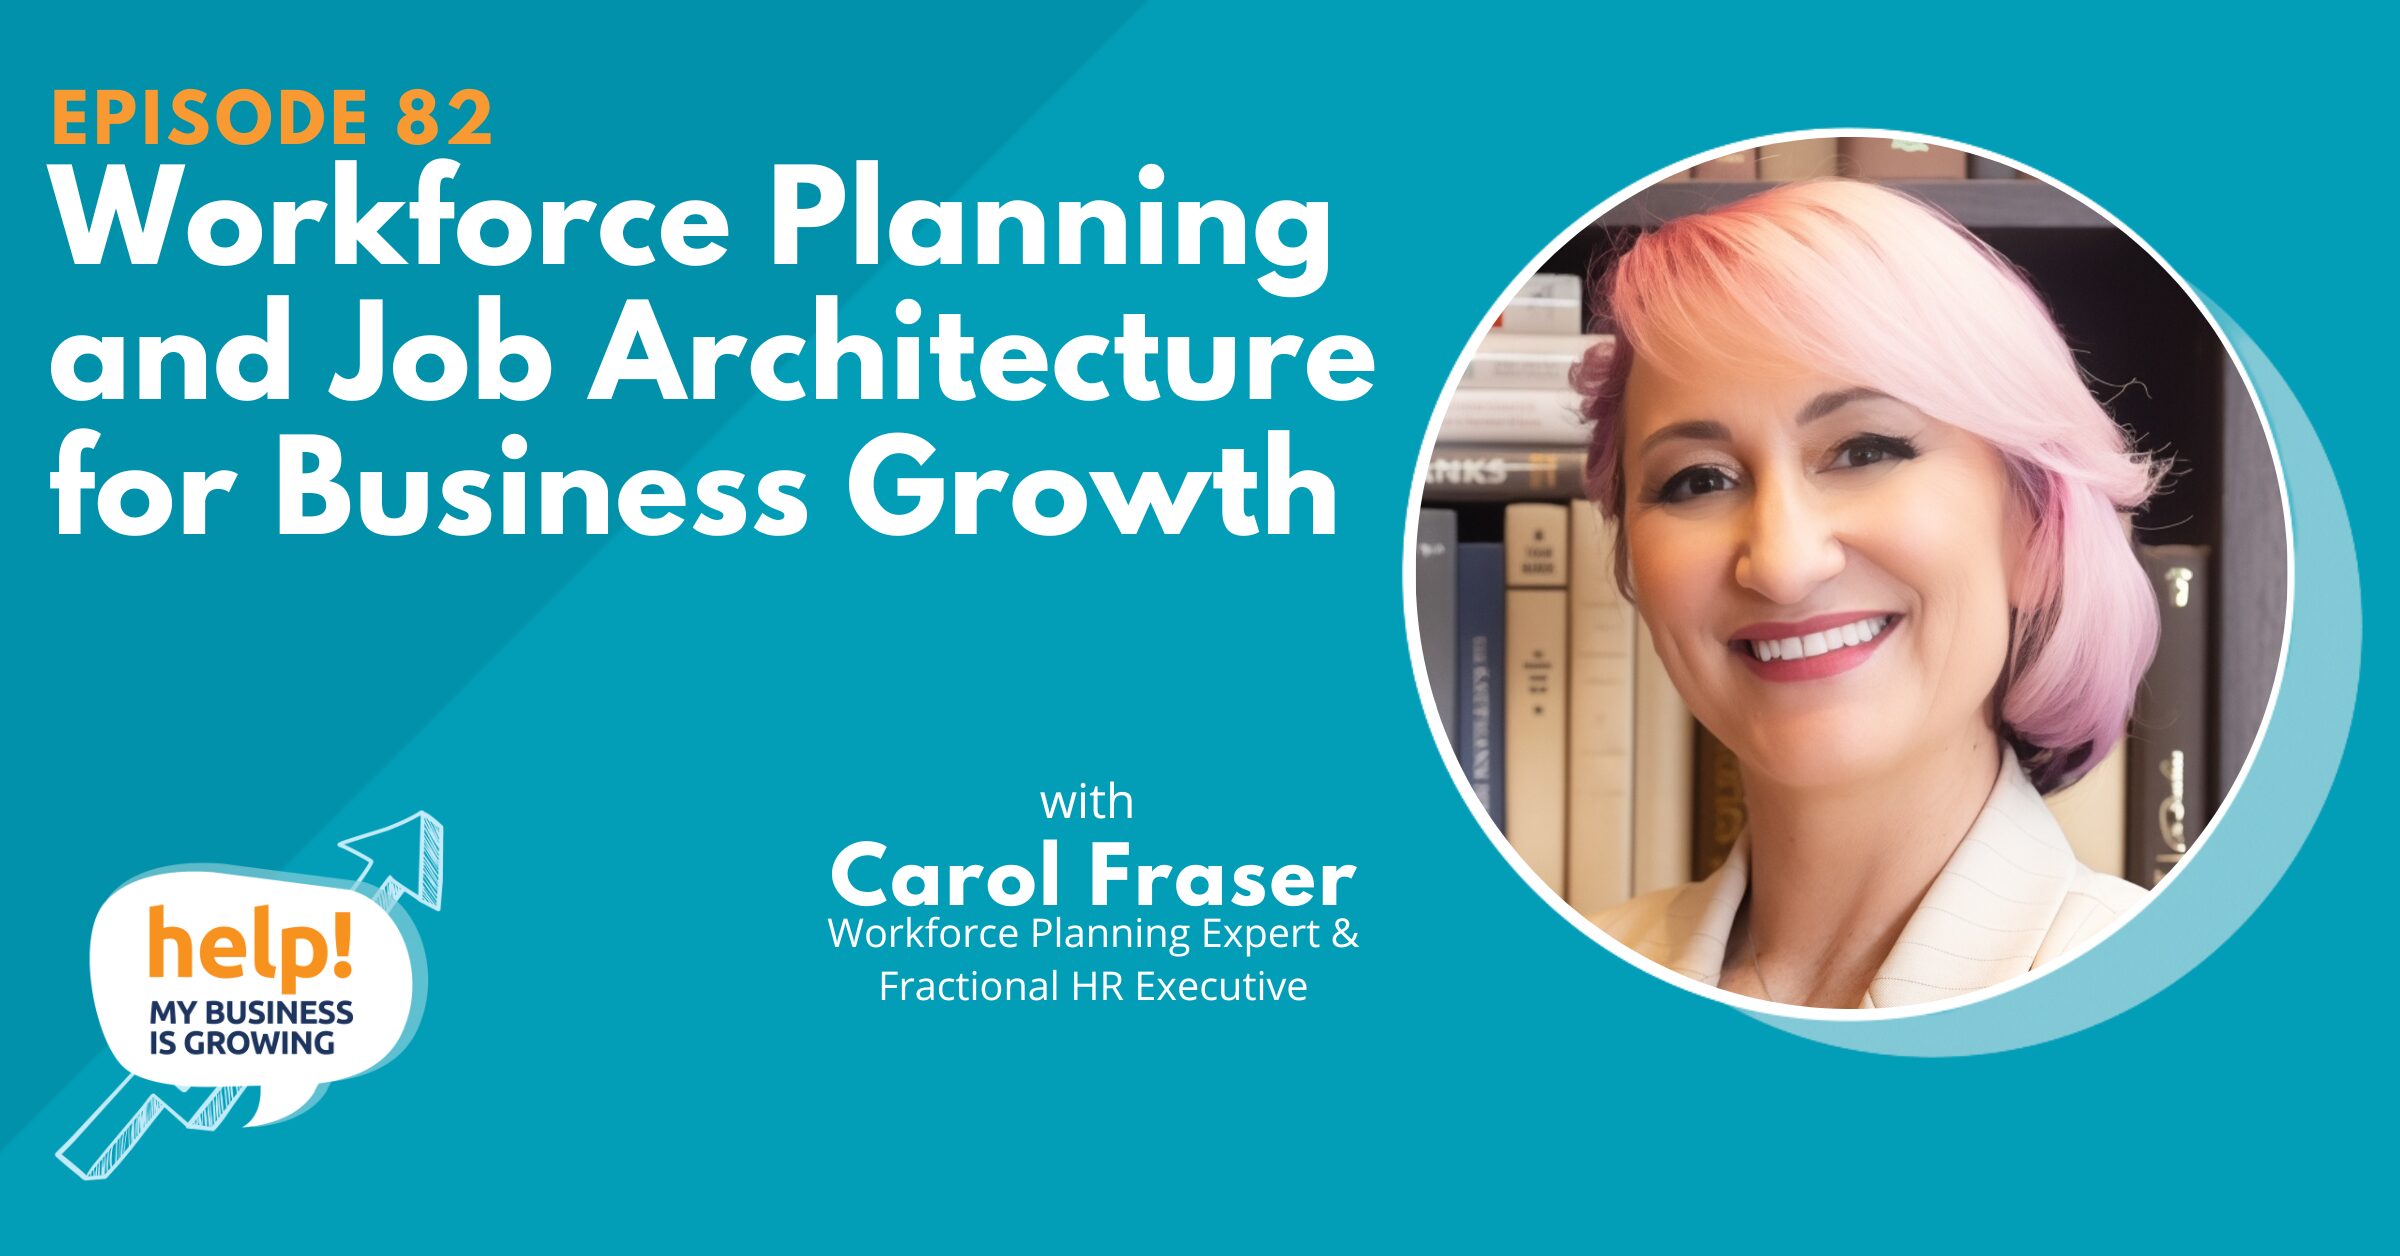 Workforce Planning and Job Architecture for Business Growth